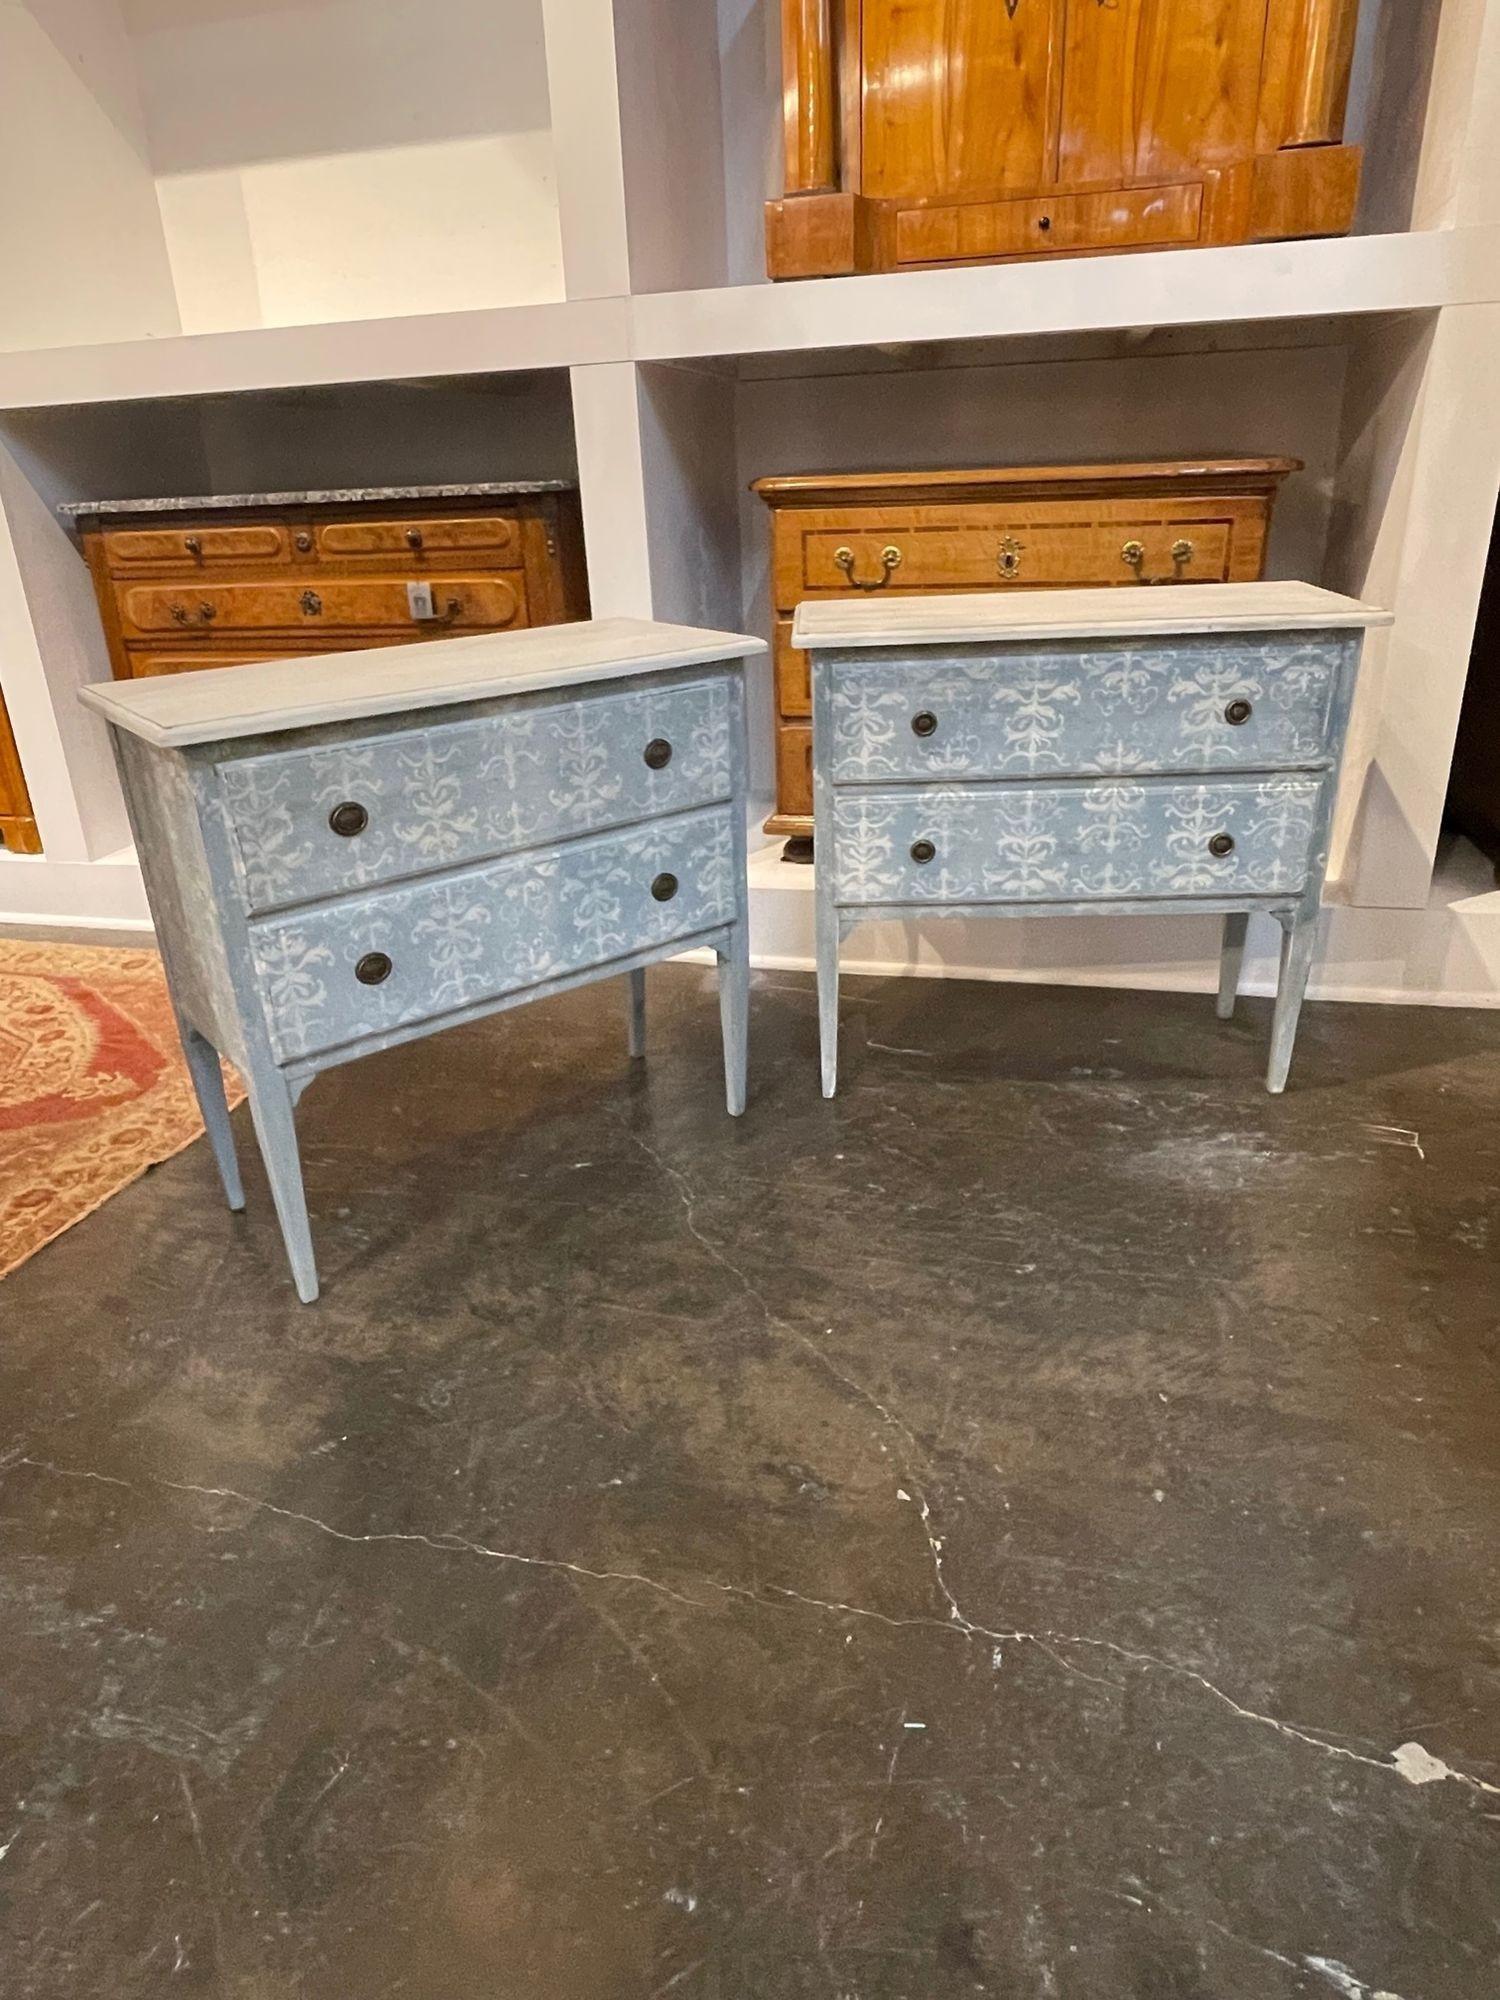 Lovely pair of vintage Italian neo-classical hand painted chests. Featuring a beautiful pale blue patina and a pretty floral like design. Creates a light and airy look. So pretty!!